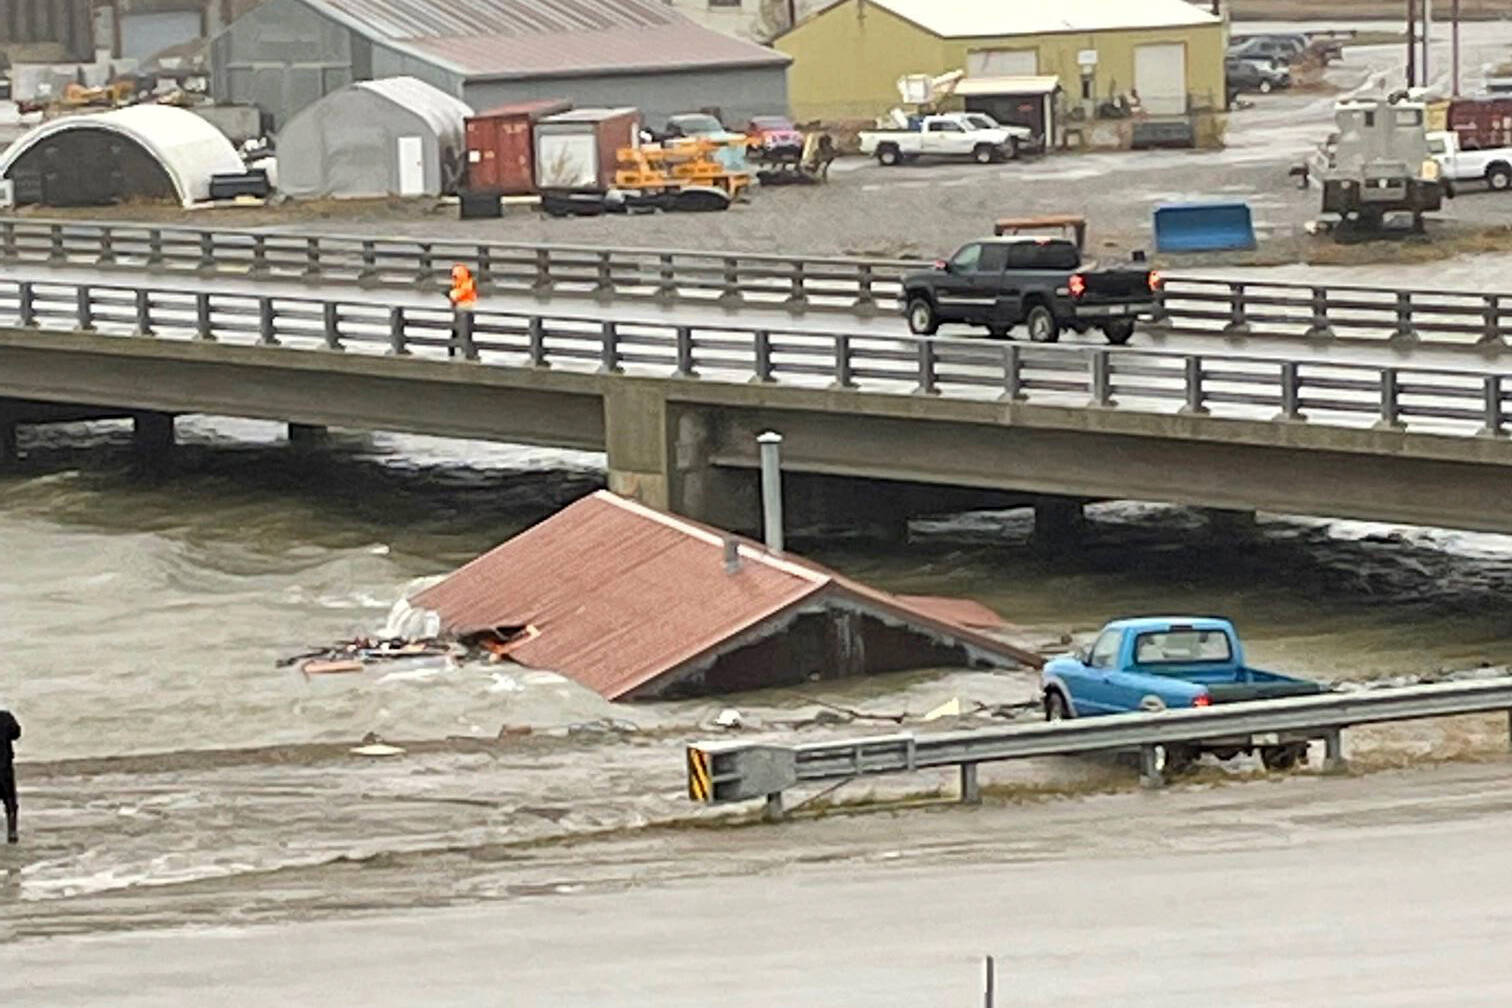 A home that was knocked off its foundation and floated down Snake River during a severe storm in Nome, Alaska, is caught under a bridge Saturday, Sept. 17, 2022. Much of Alaska’s western coast was battered by the storm, which was the remnant of Typhoon Merbok, causing the most damage of any storm in the last half century. (AP Photo/Peggy Fagerstrom)